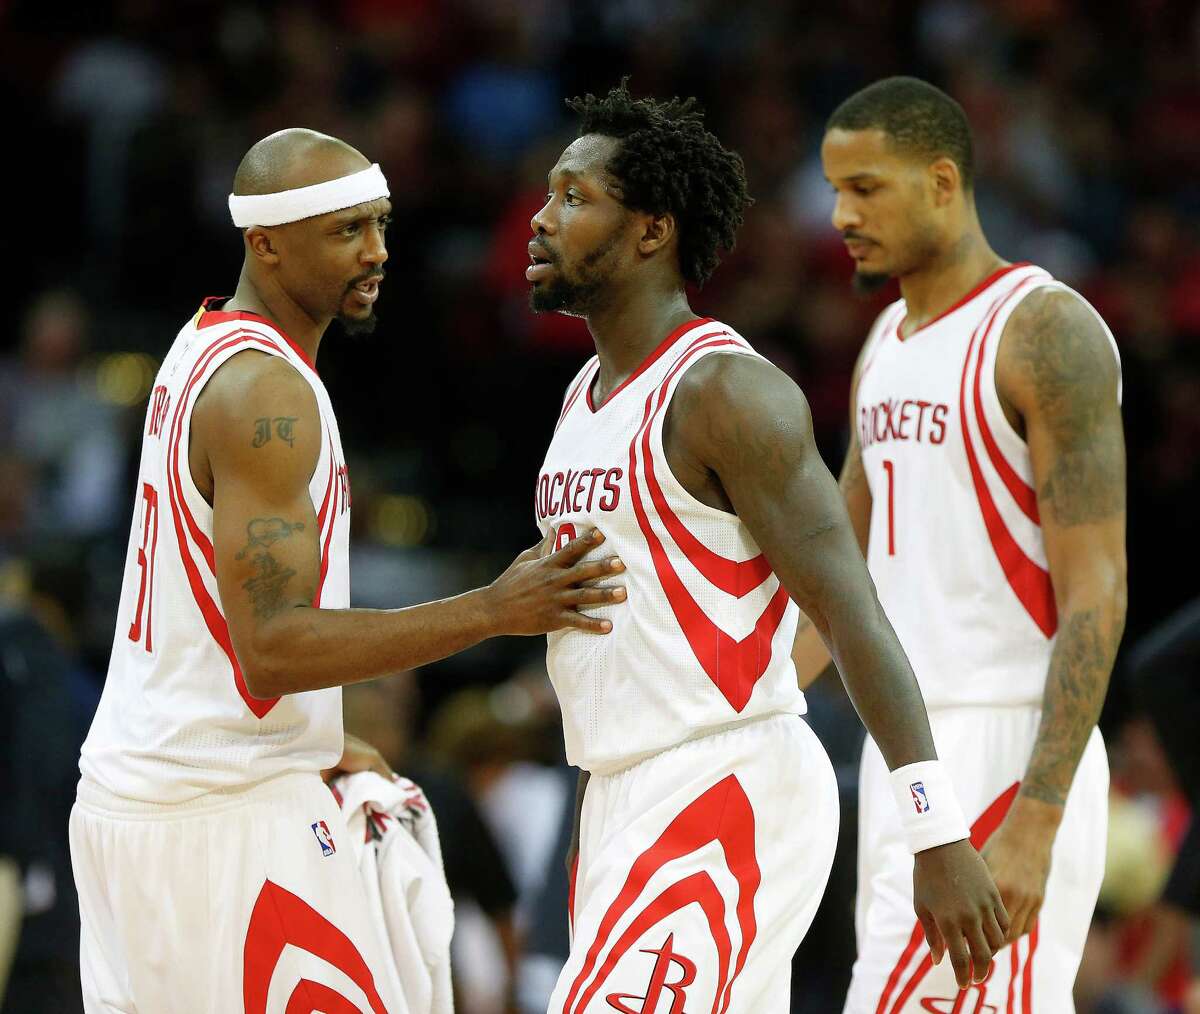 Rockets players Pat Beverley (center) and Trevor Ariza (right) received votes in the NBA's All-Defensive Team voting announced Wednesday. Click through the gallery for an analysis of the Rockets' 2015-16 roster.